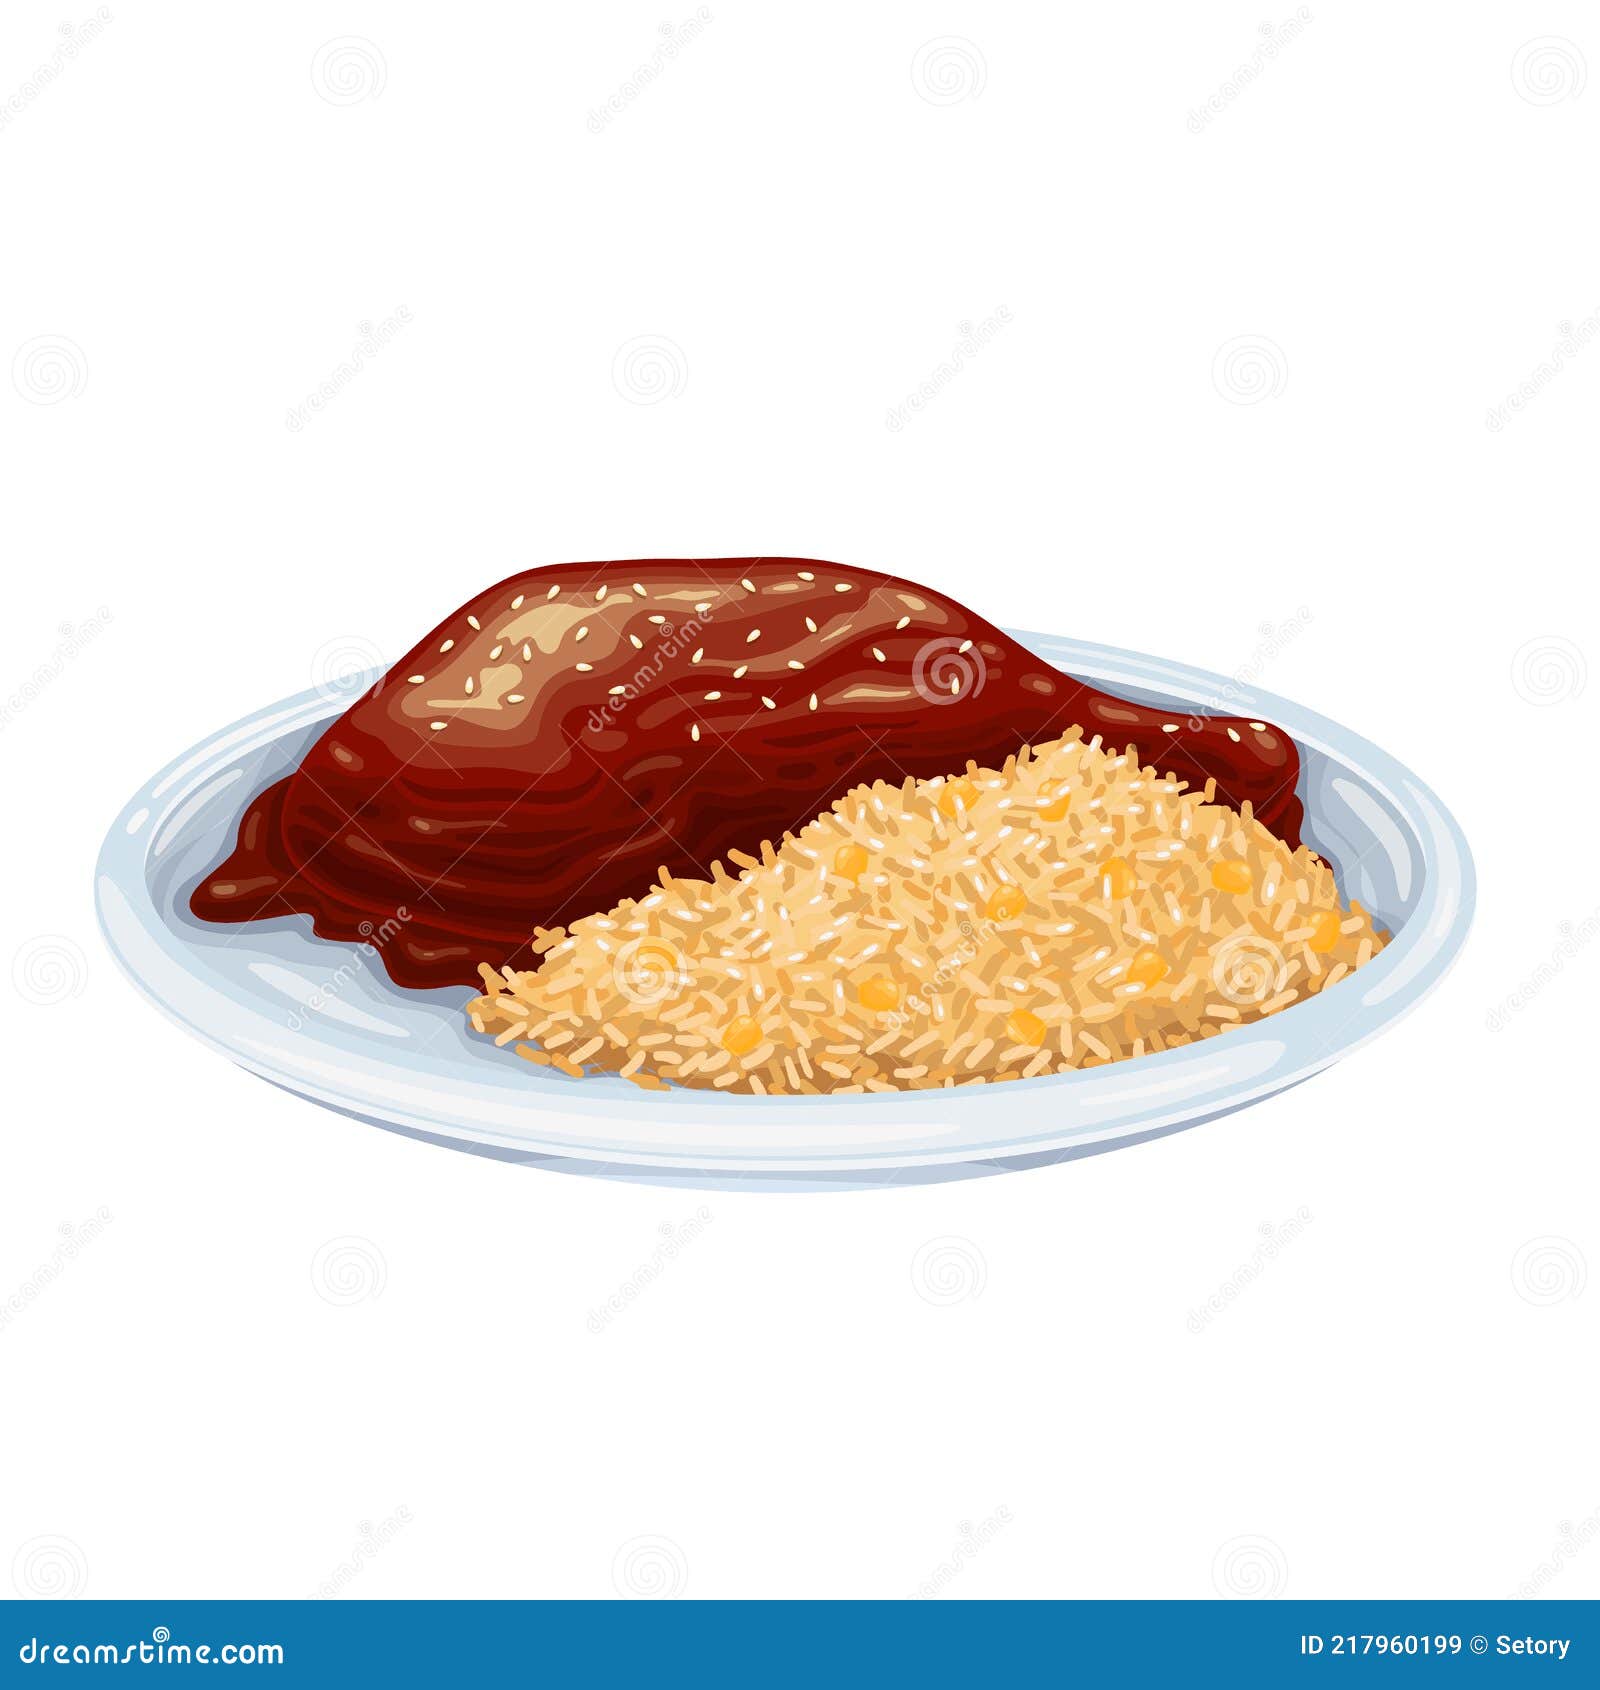 Mole Poblano with rice stock vector. Illustration of gourmet - 217960199